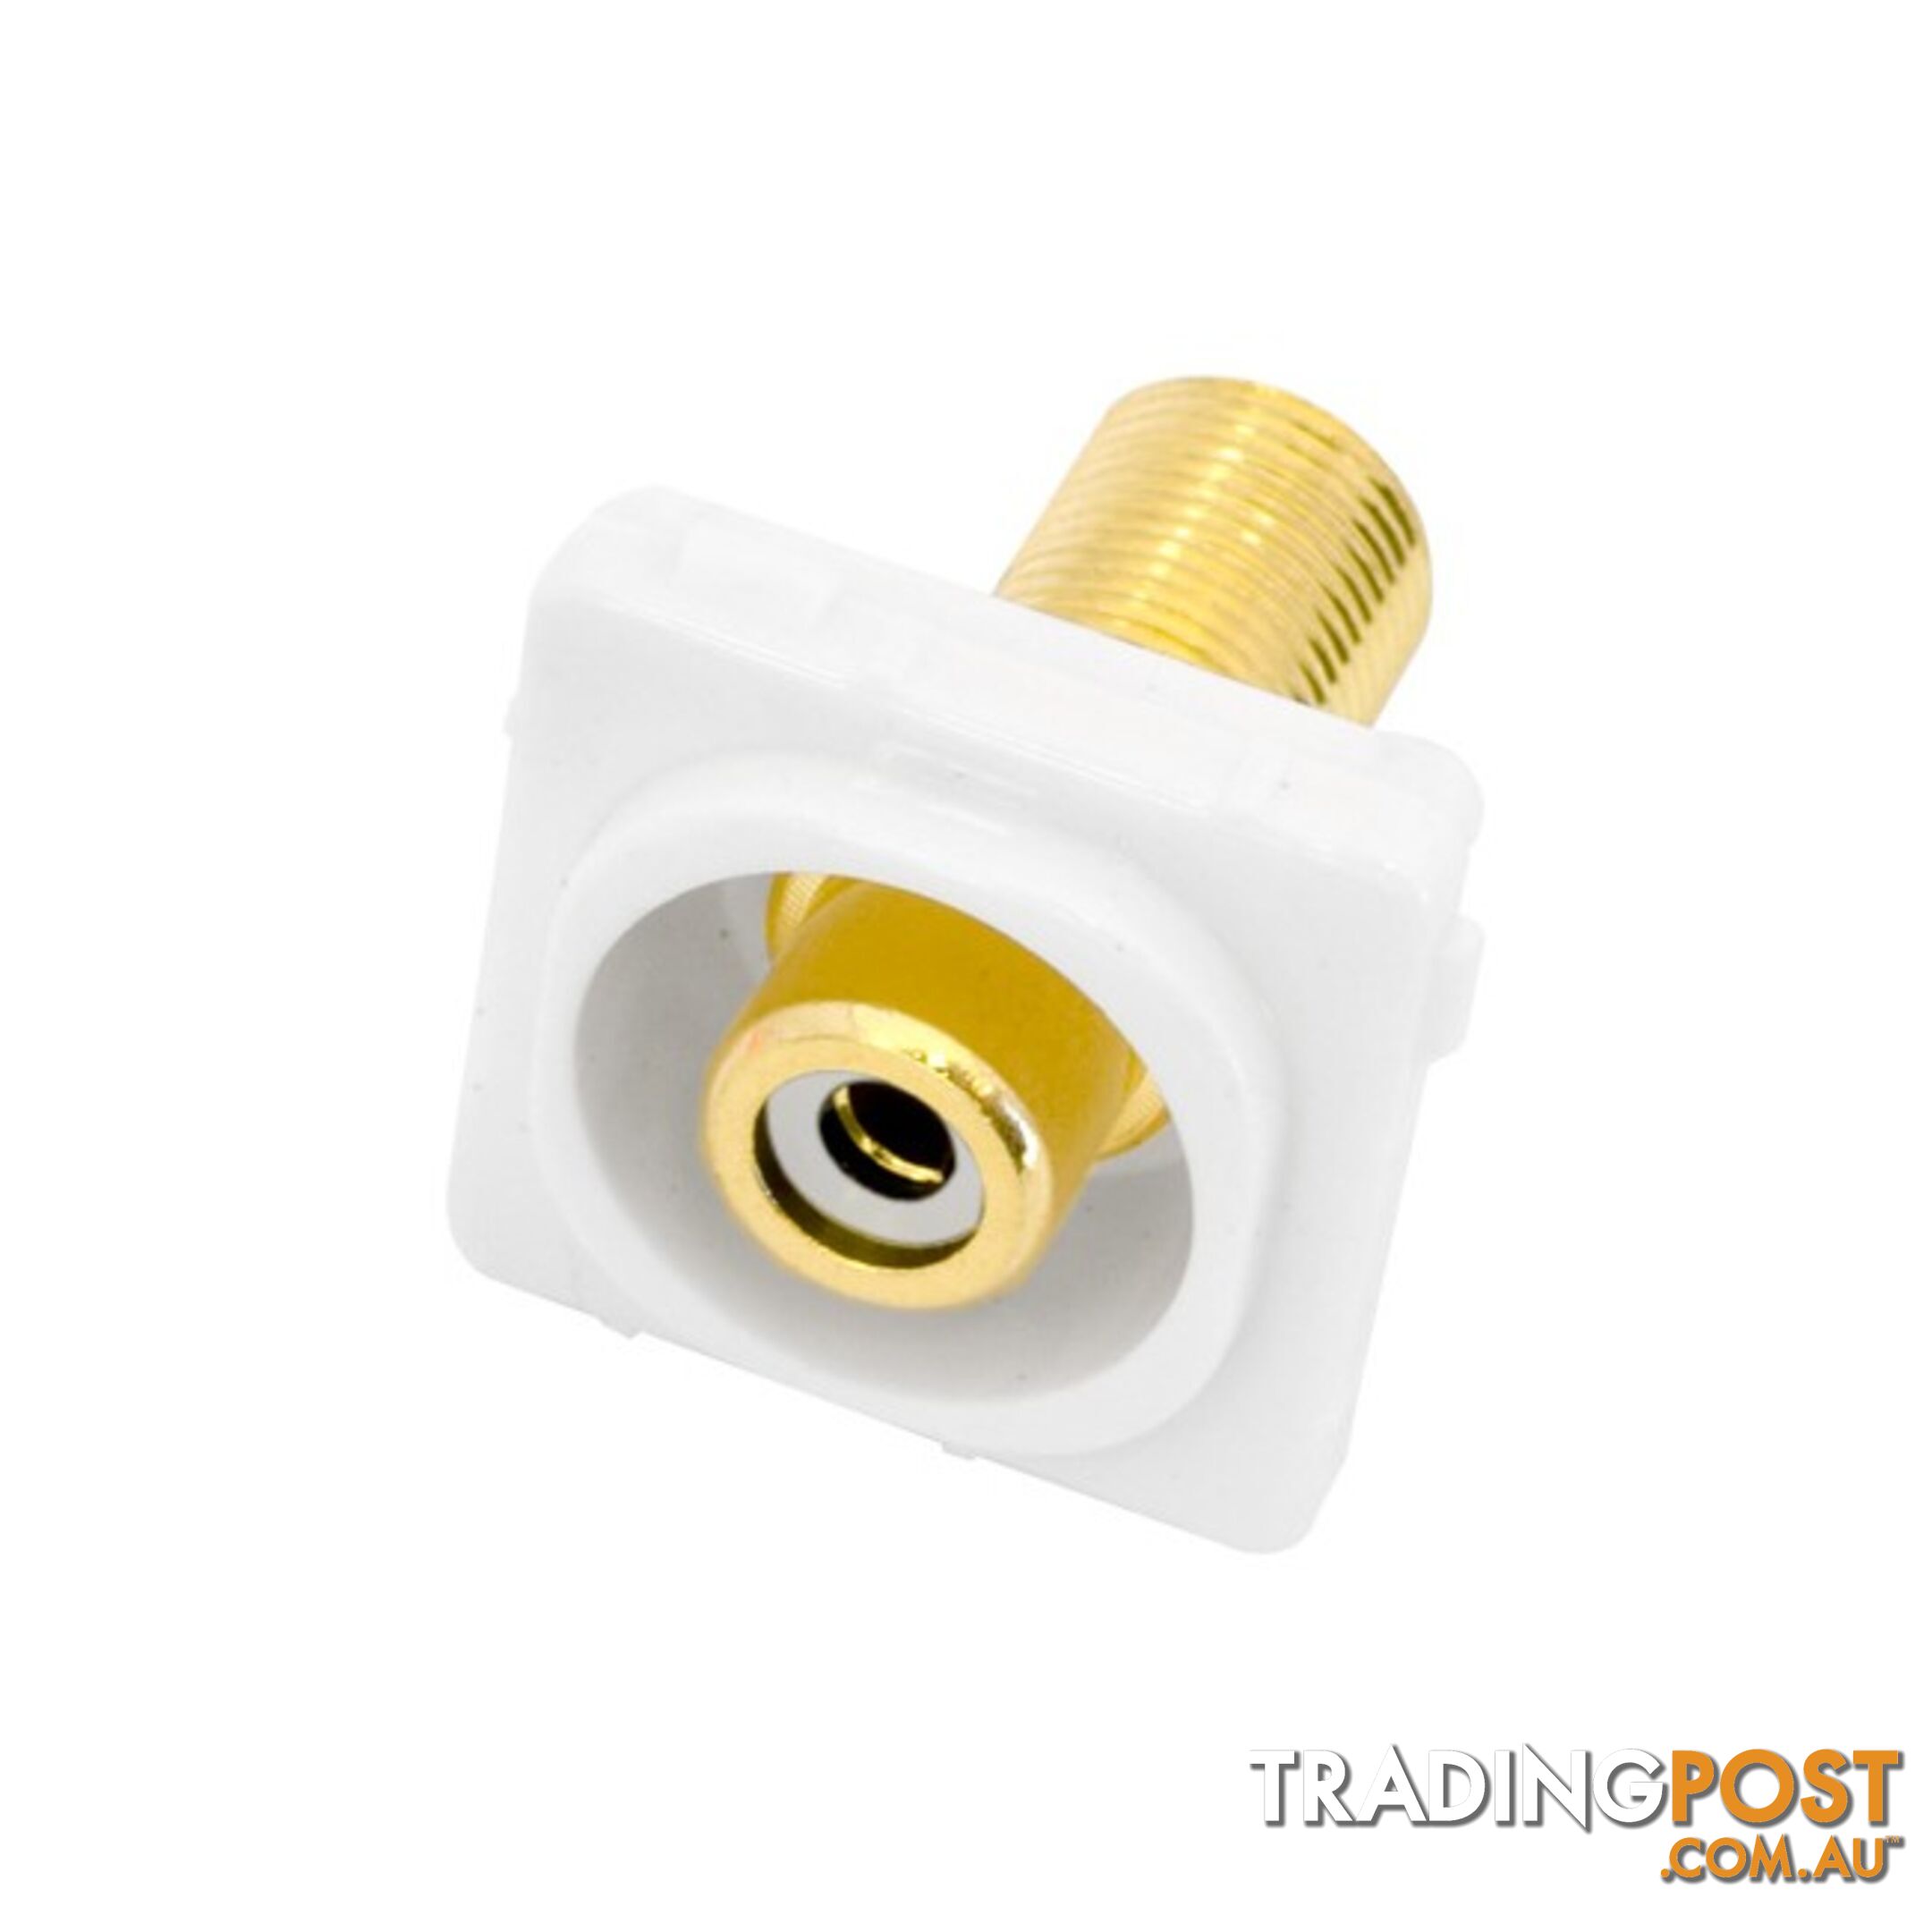 PK4652 WHITE RCA SOCKET TO 'F' SOCKET INSERT TO SUIT CLIPSAL GOLD